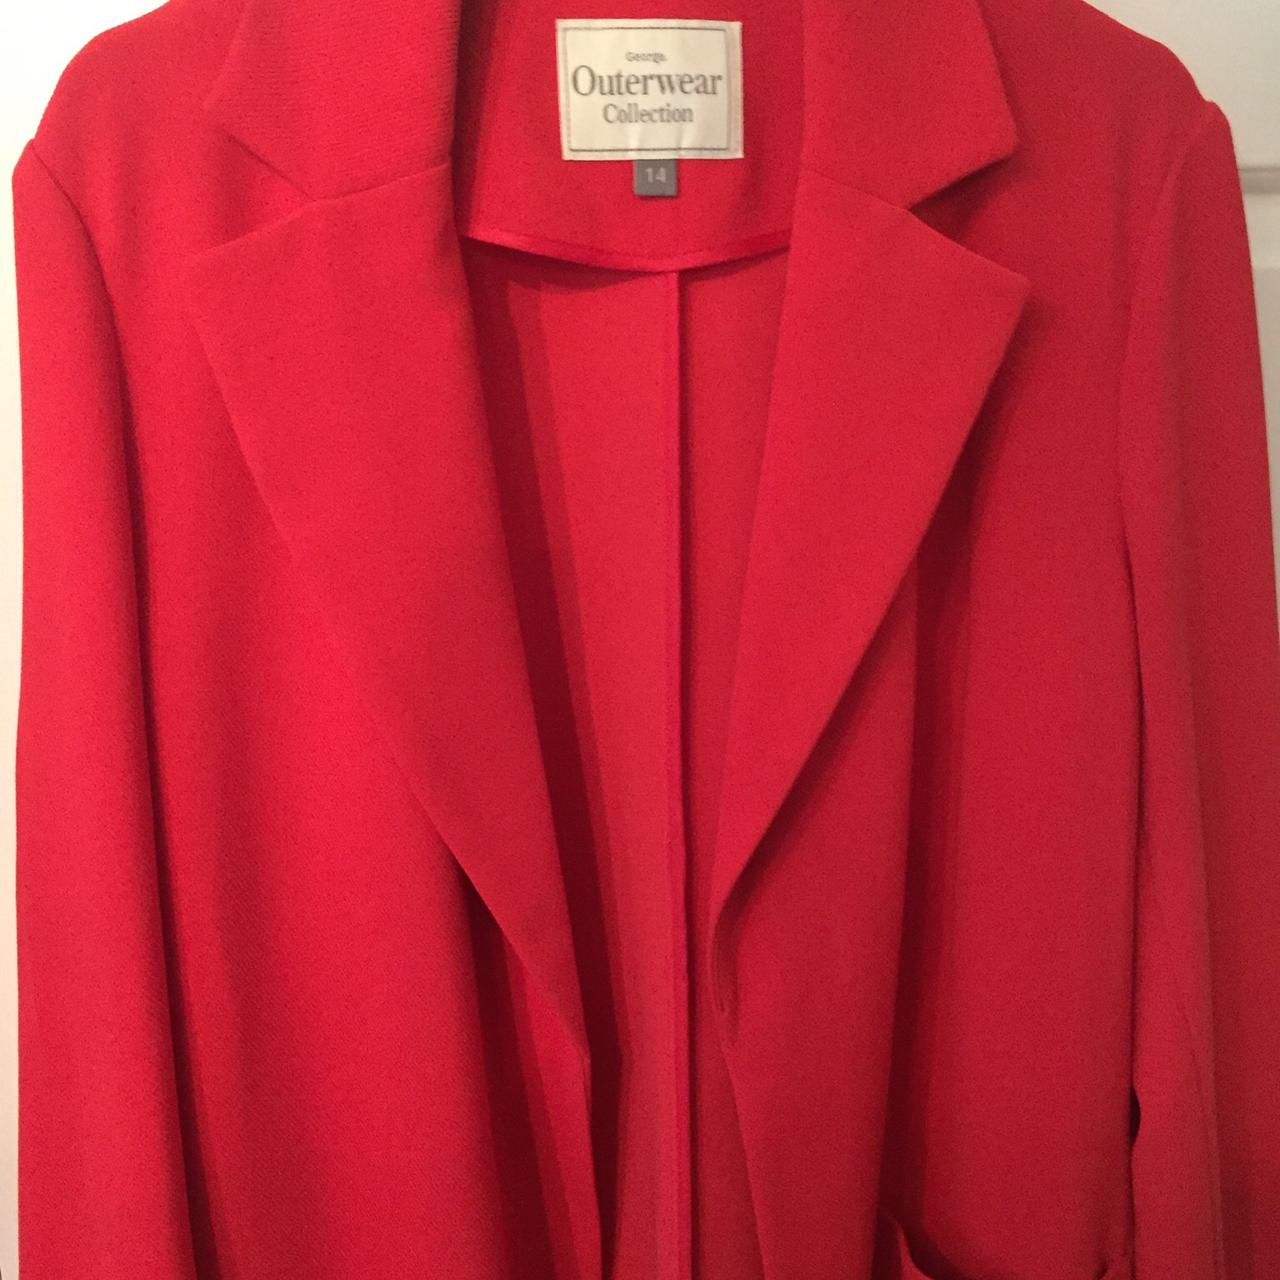 LADIES George Asda Red Jacket Size 12 Sleeves 3 Buttons Suit Womens